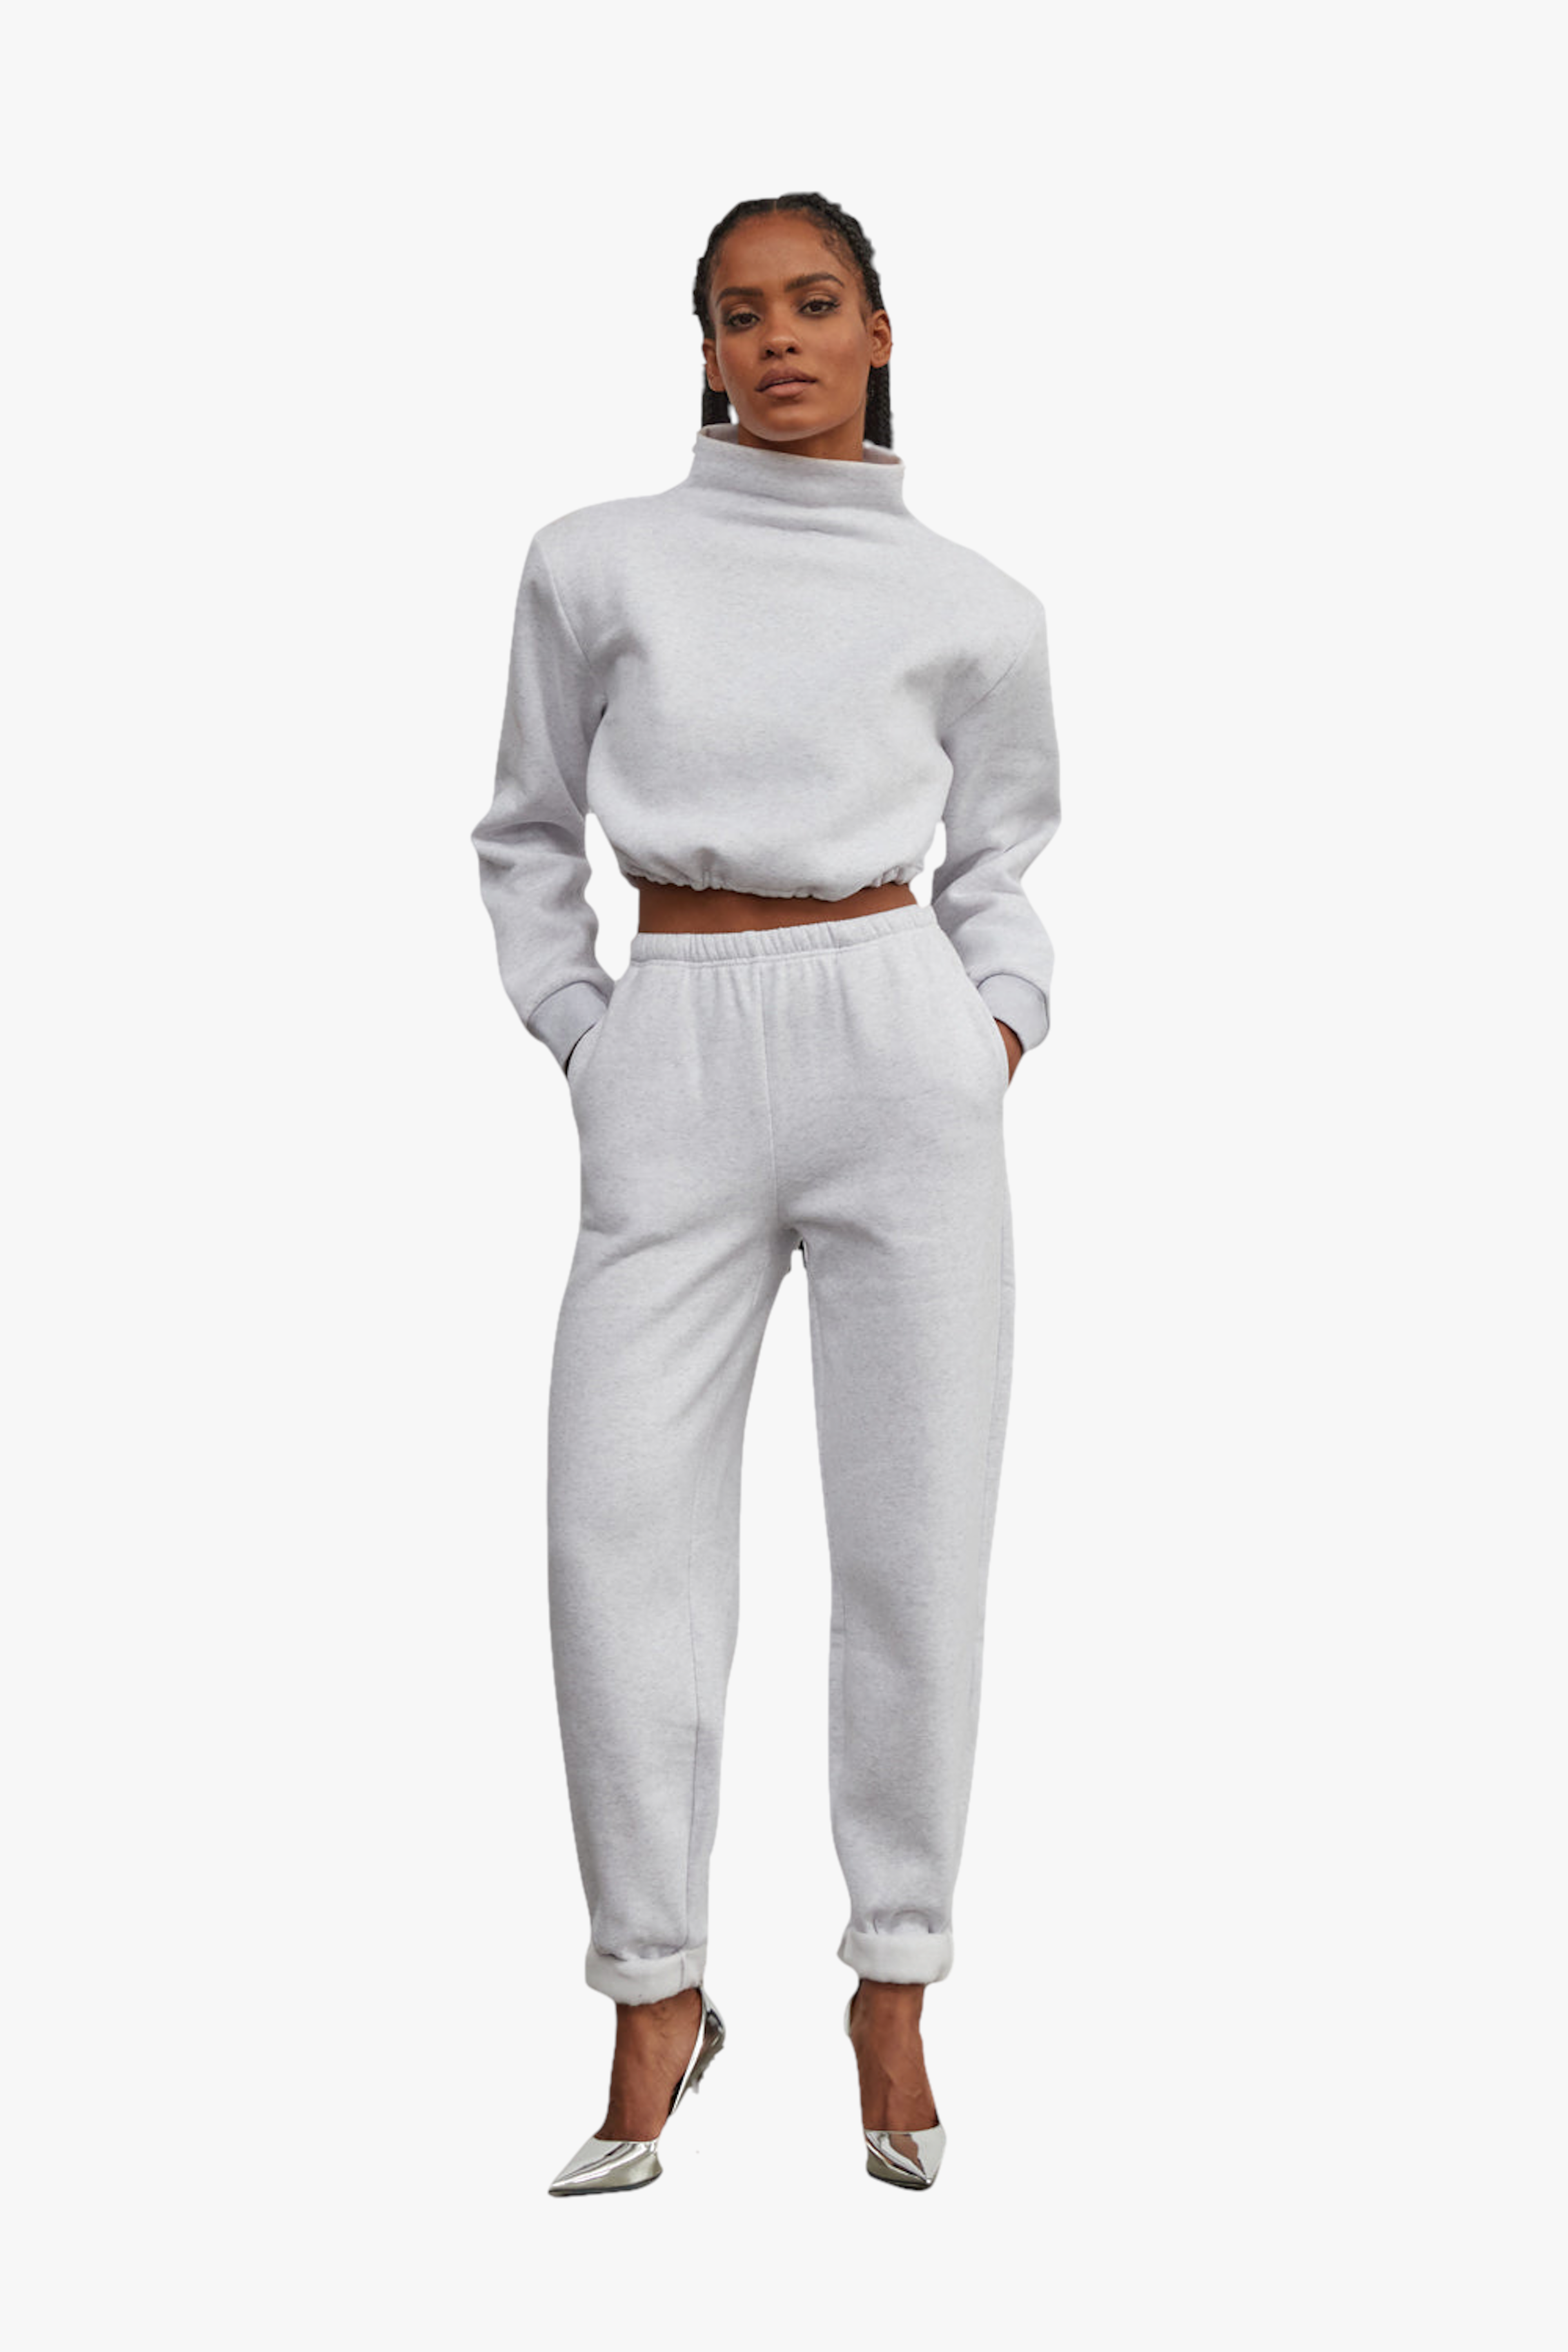 Shop the Latest Collection of Women's Track Pants